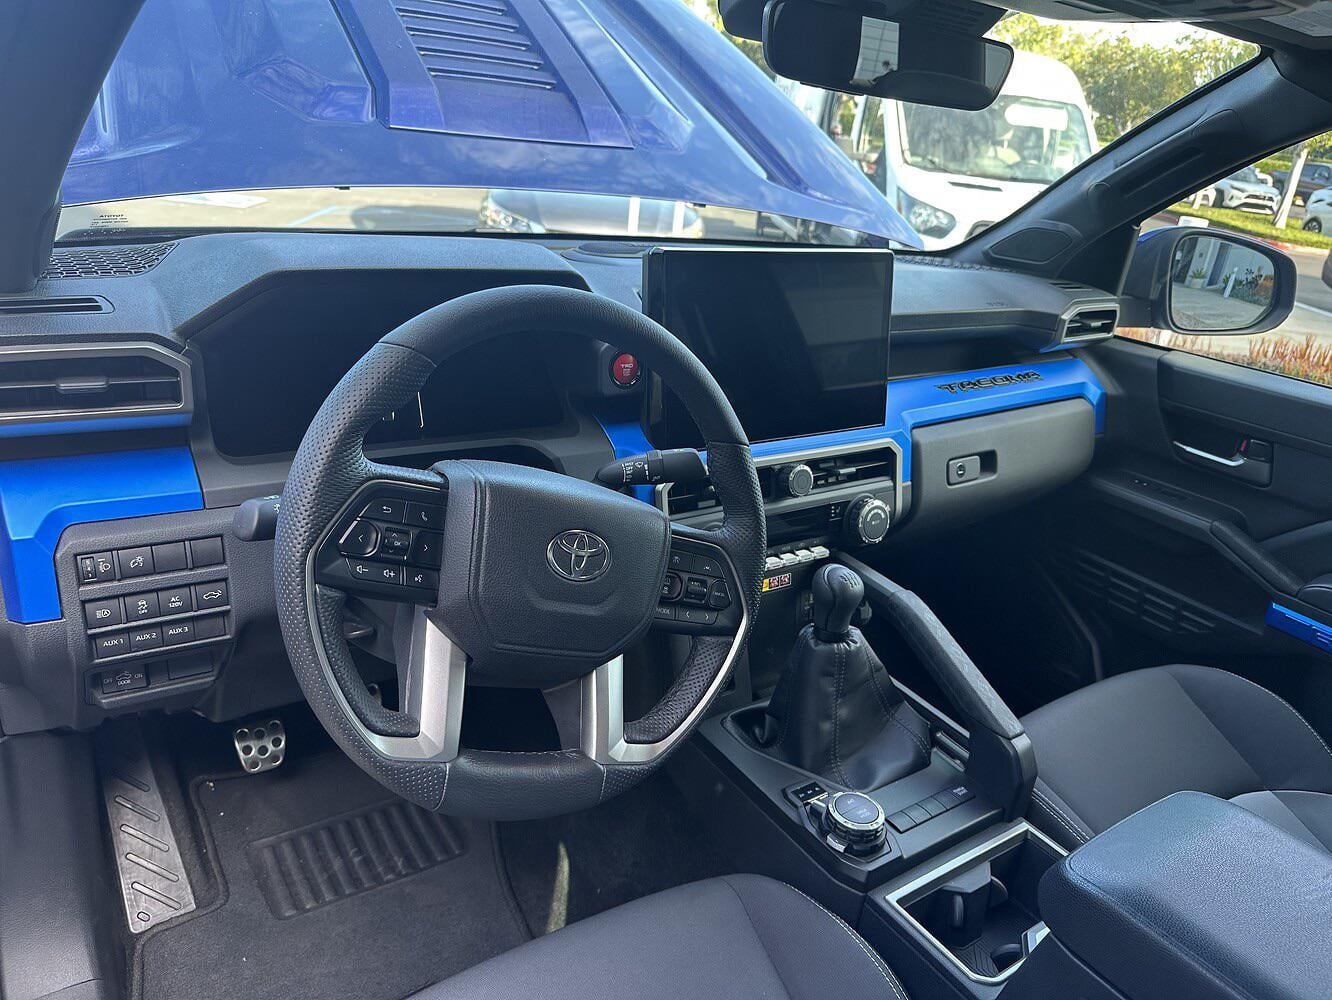 2024 Tacoma Spotted: 2024 Tacoma TRD Sport in Blue Crush Metallic 2024-tacoma-trd-sport-blue-crush-4-